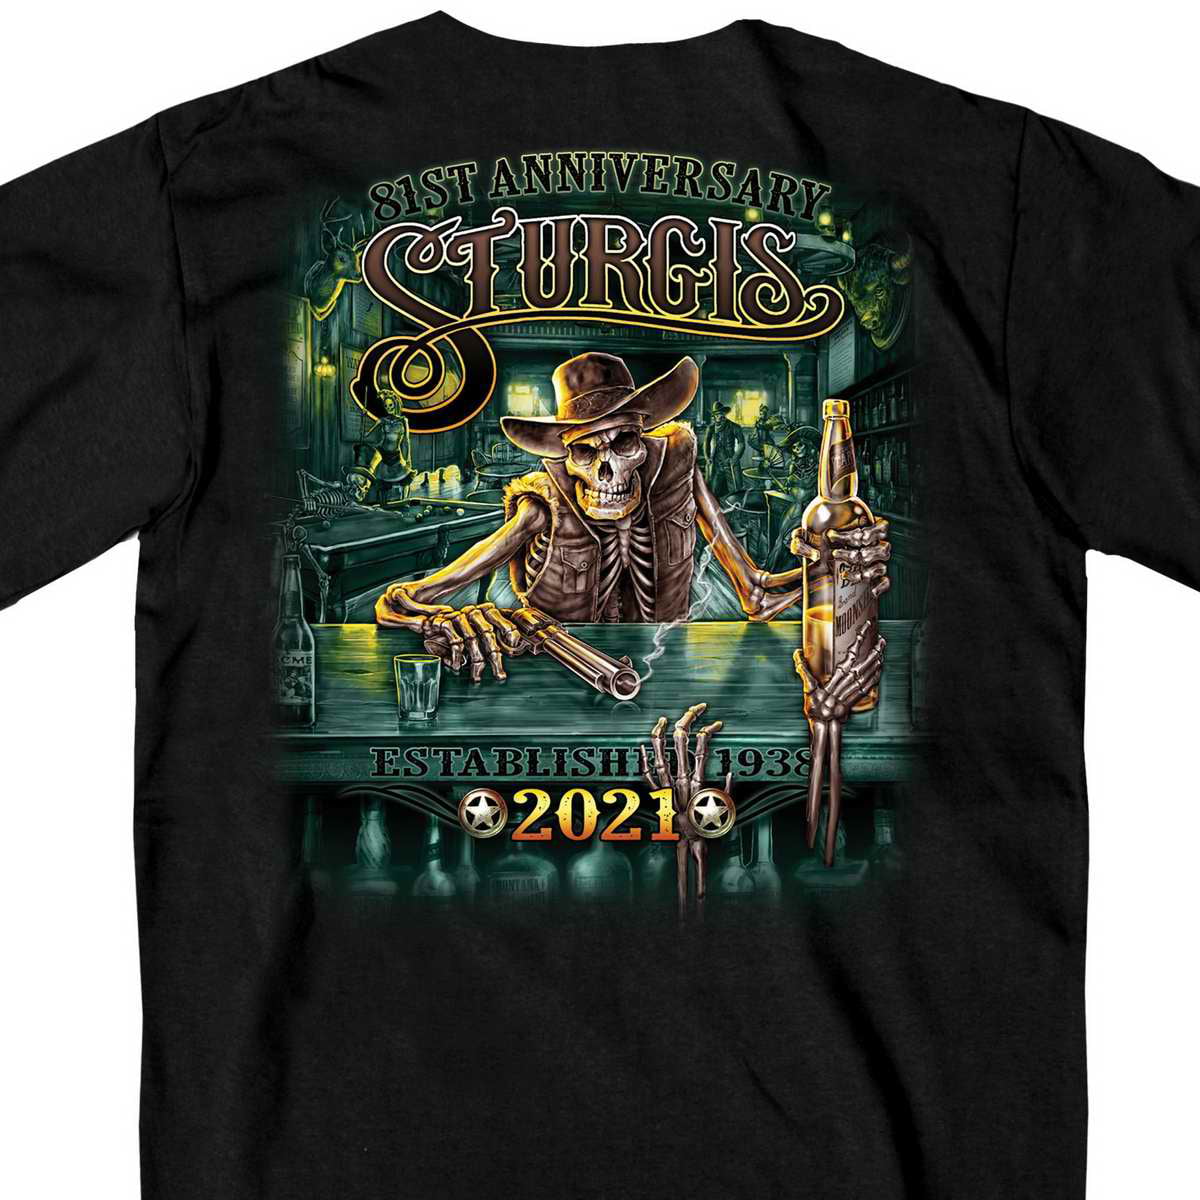 Official 2021 Sturgis Motorcycle Rally SPM1957 Men’s Black Saloon T Shirt Large 